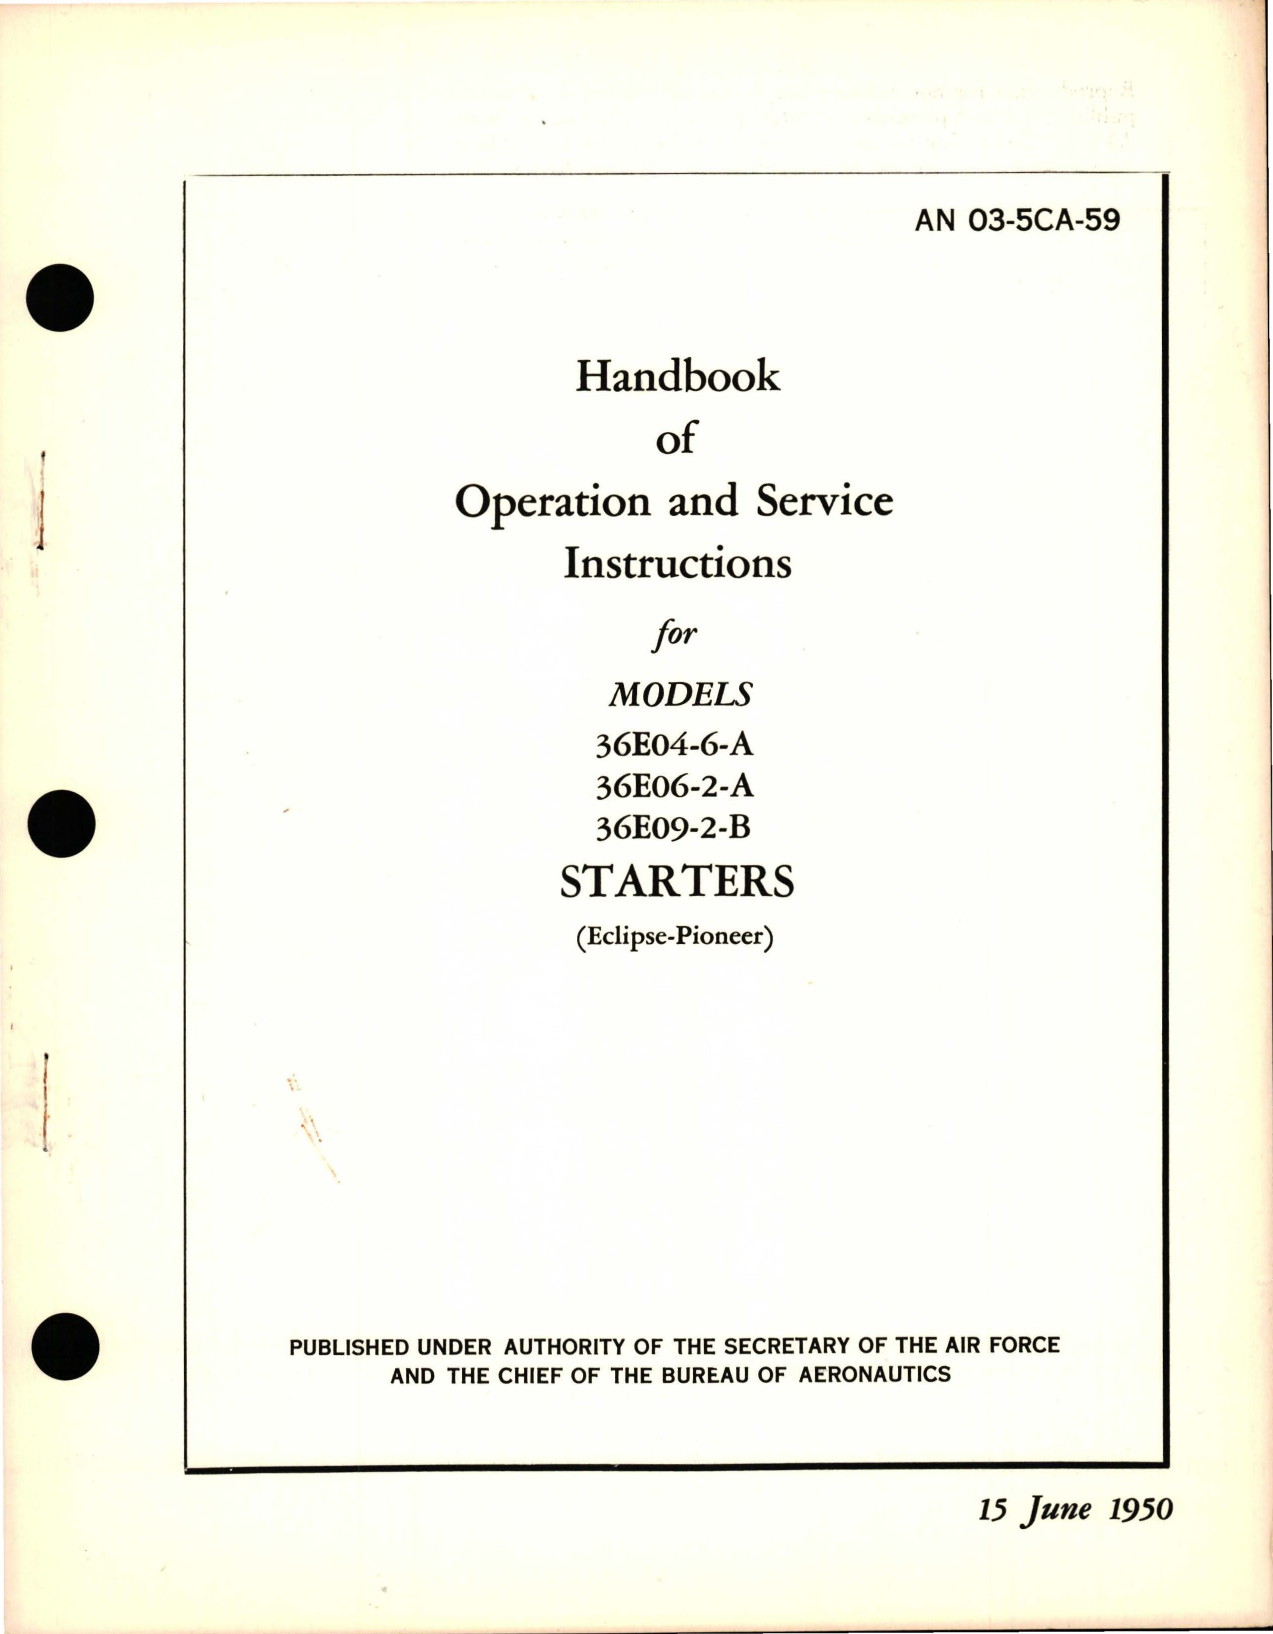 Sample page 1 from AirCorps Library document: Operation and Service Instructions for Starters - Models 36E04-6-A, 36E06-2-A, 36E09-2-B